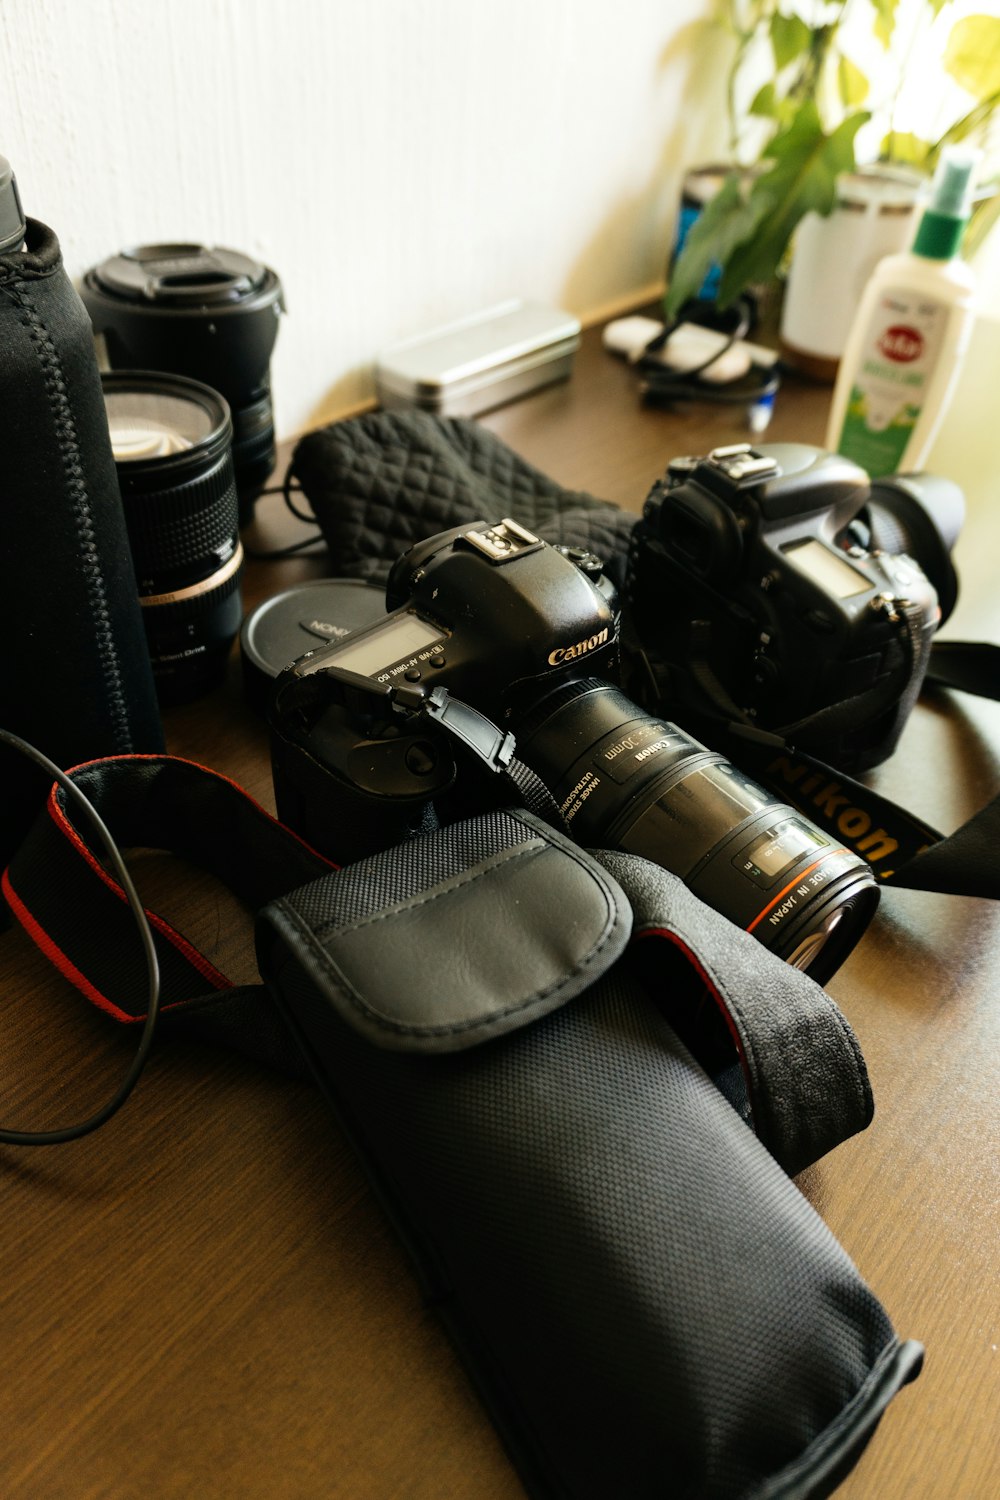 a camera and some other items on a table